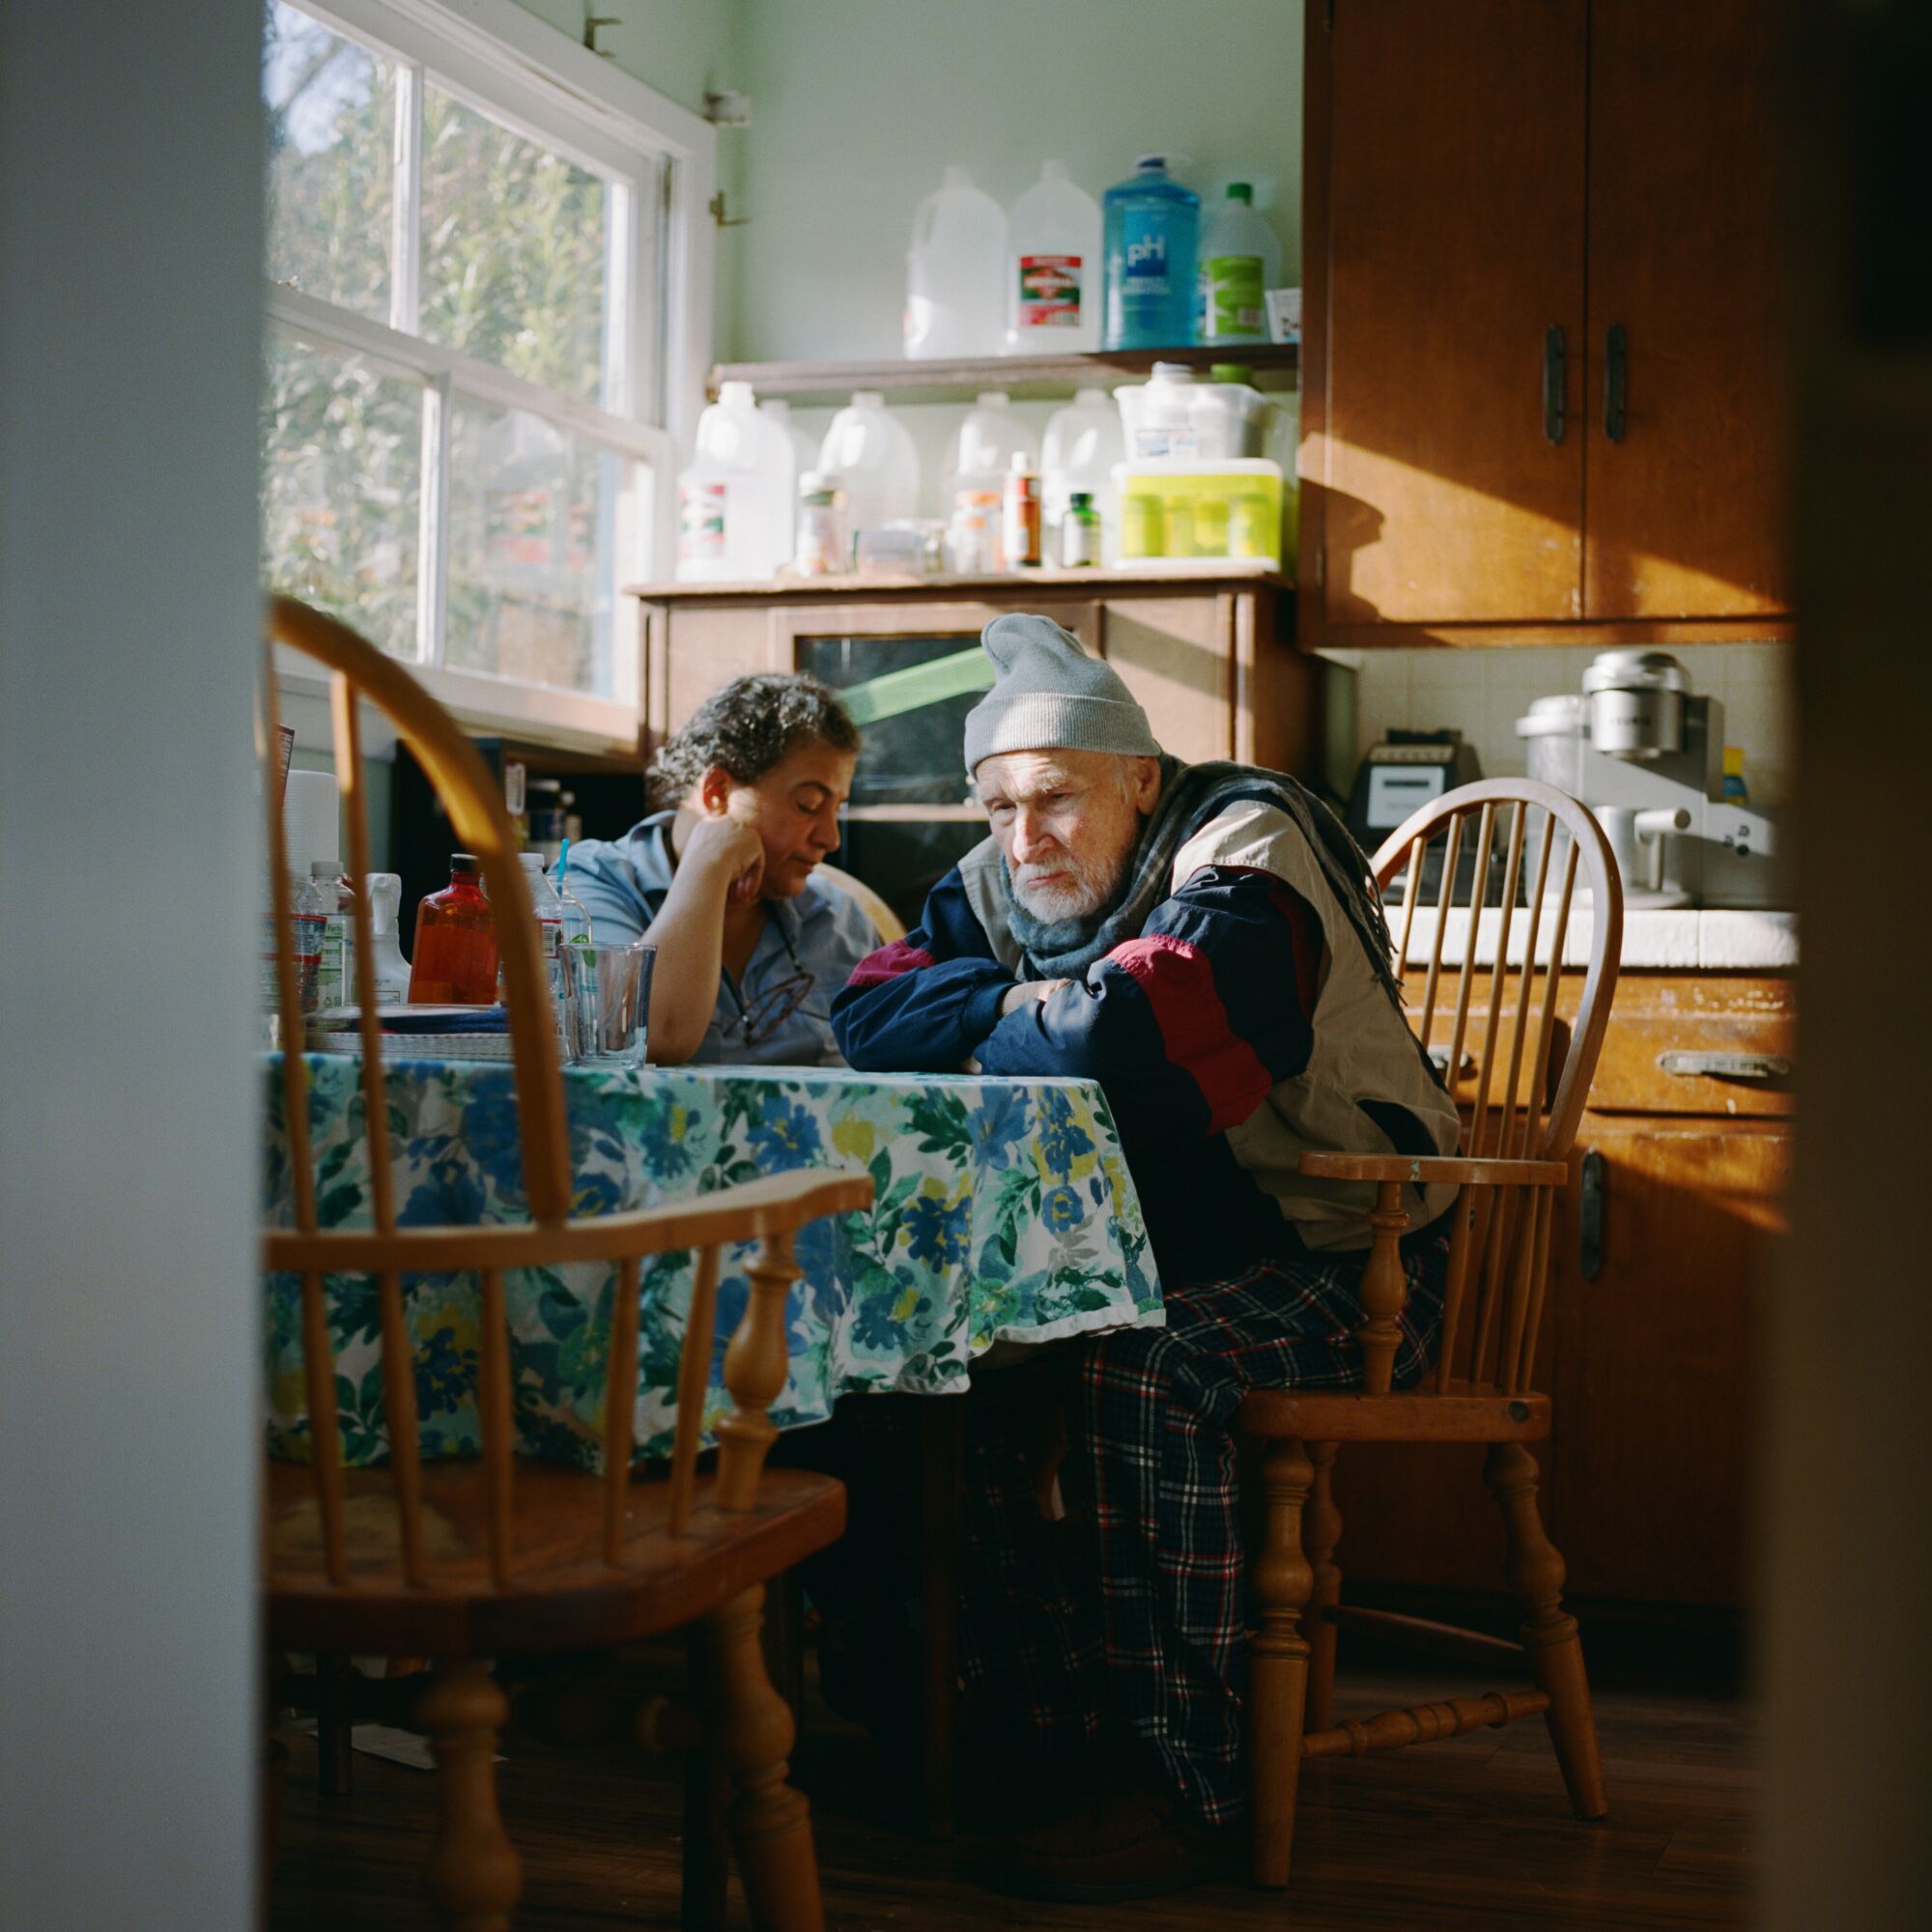 Andrzej, right, and his caretaker sit at the dining room table in the Stefanski family home.